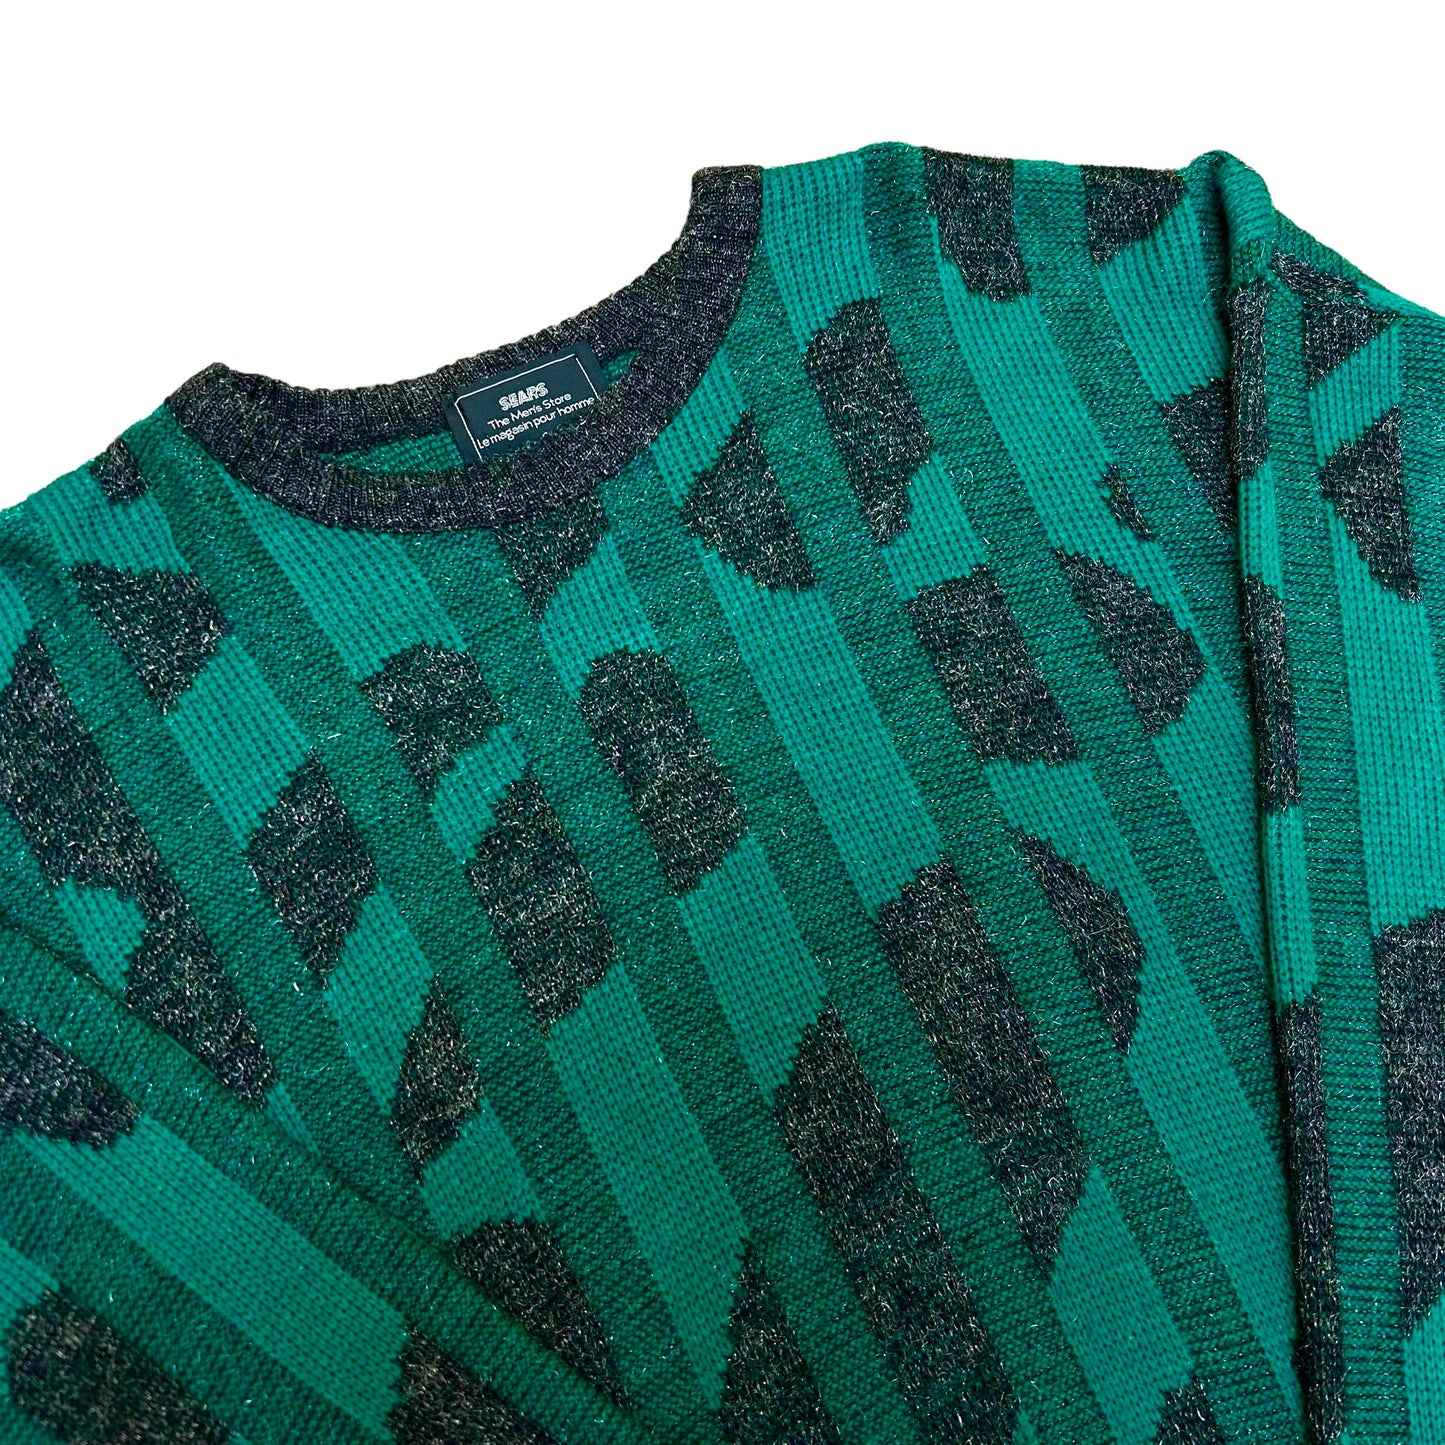 Vintage 1990s Sears “The Men’s Store” Black/Green Patterned Knit Sweater - Size Large